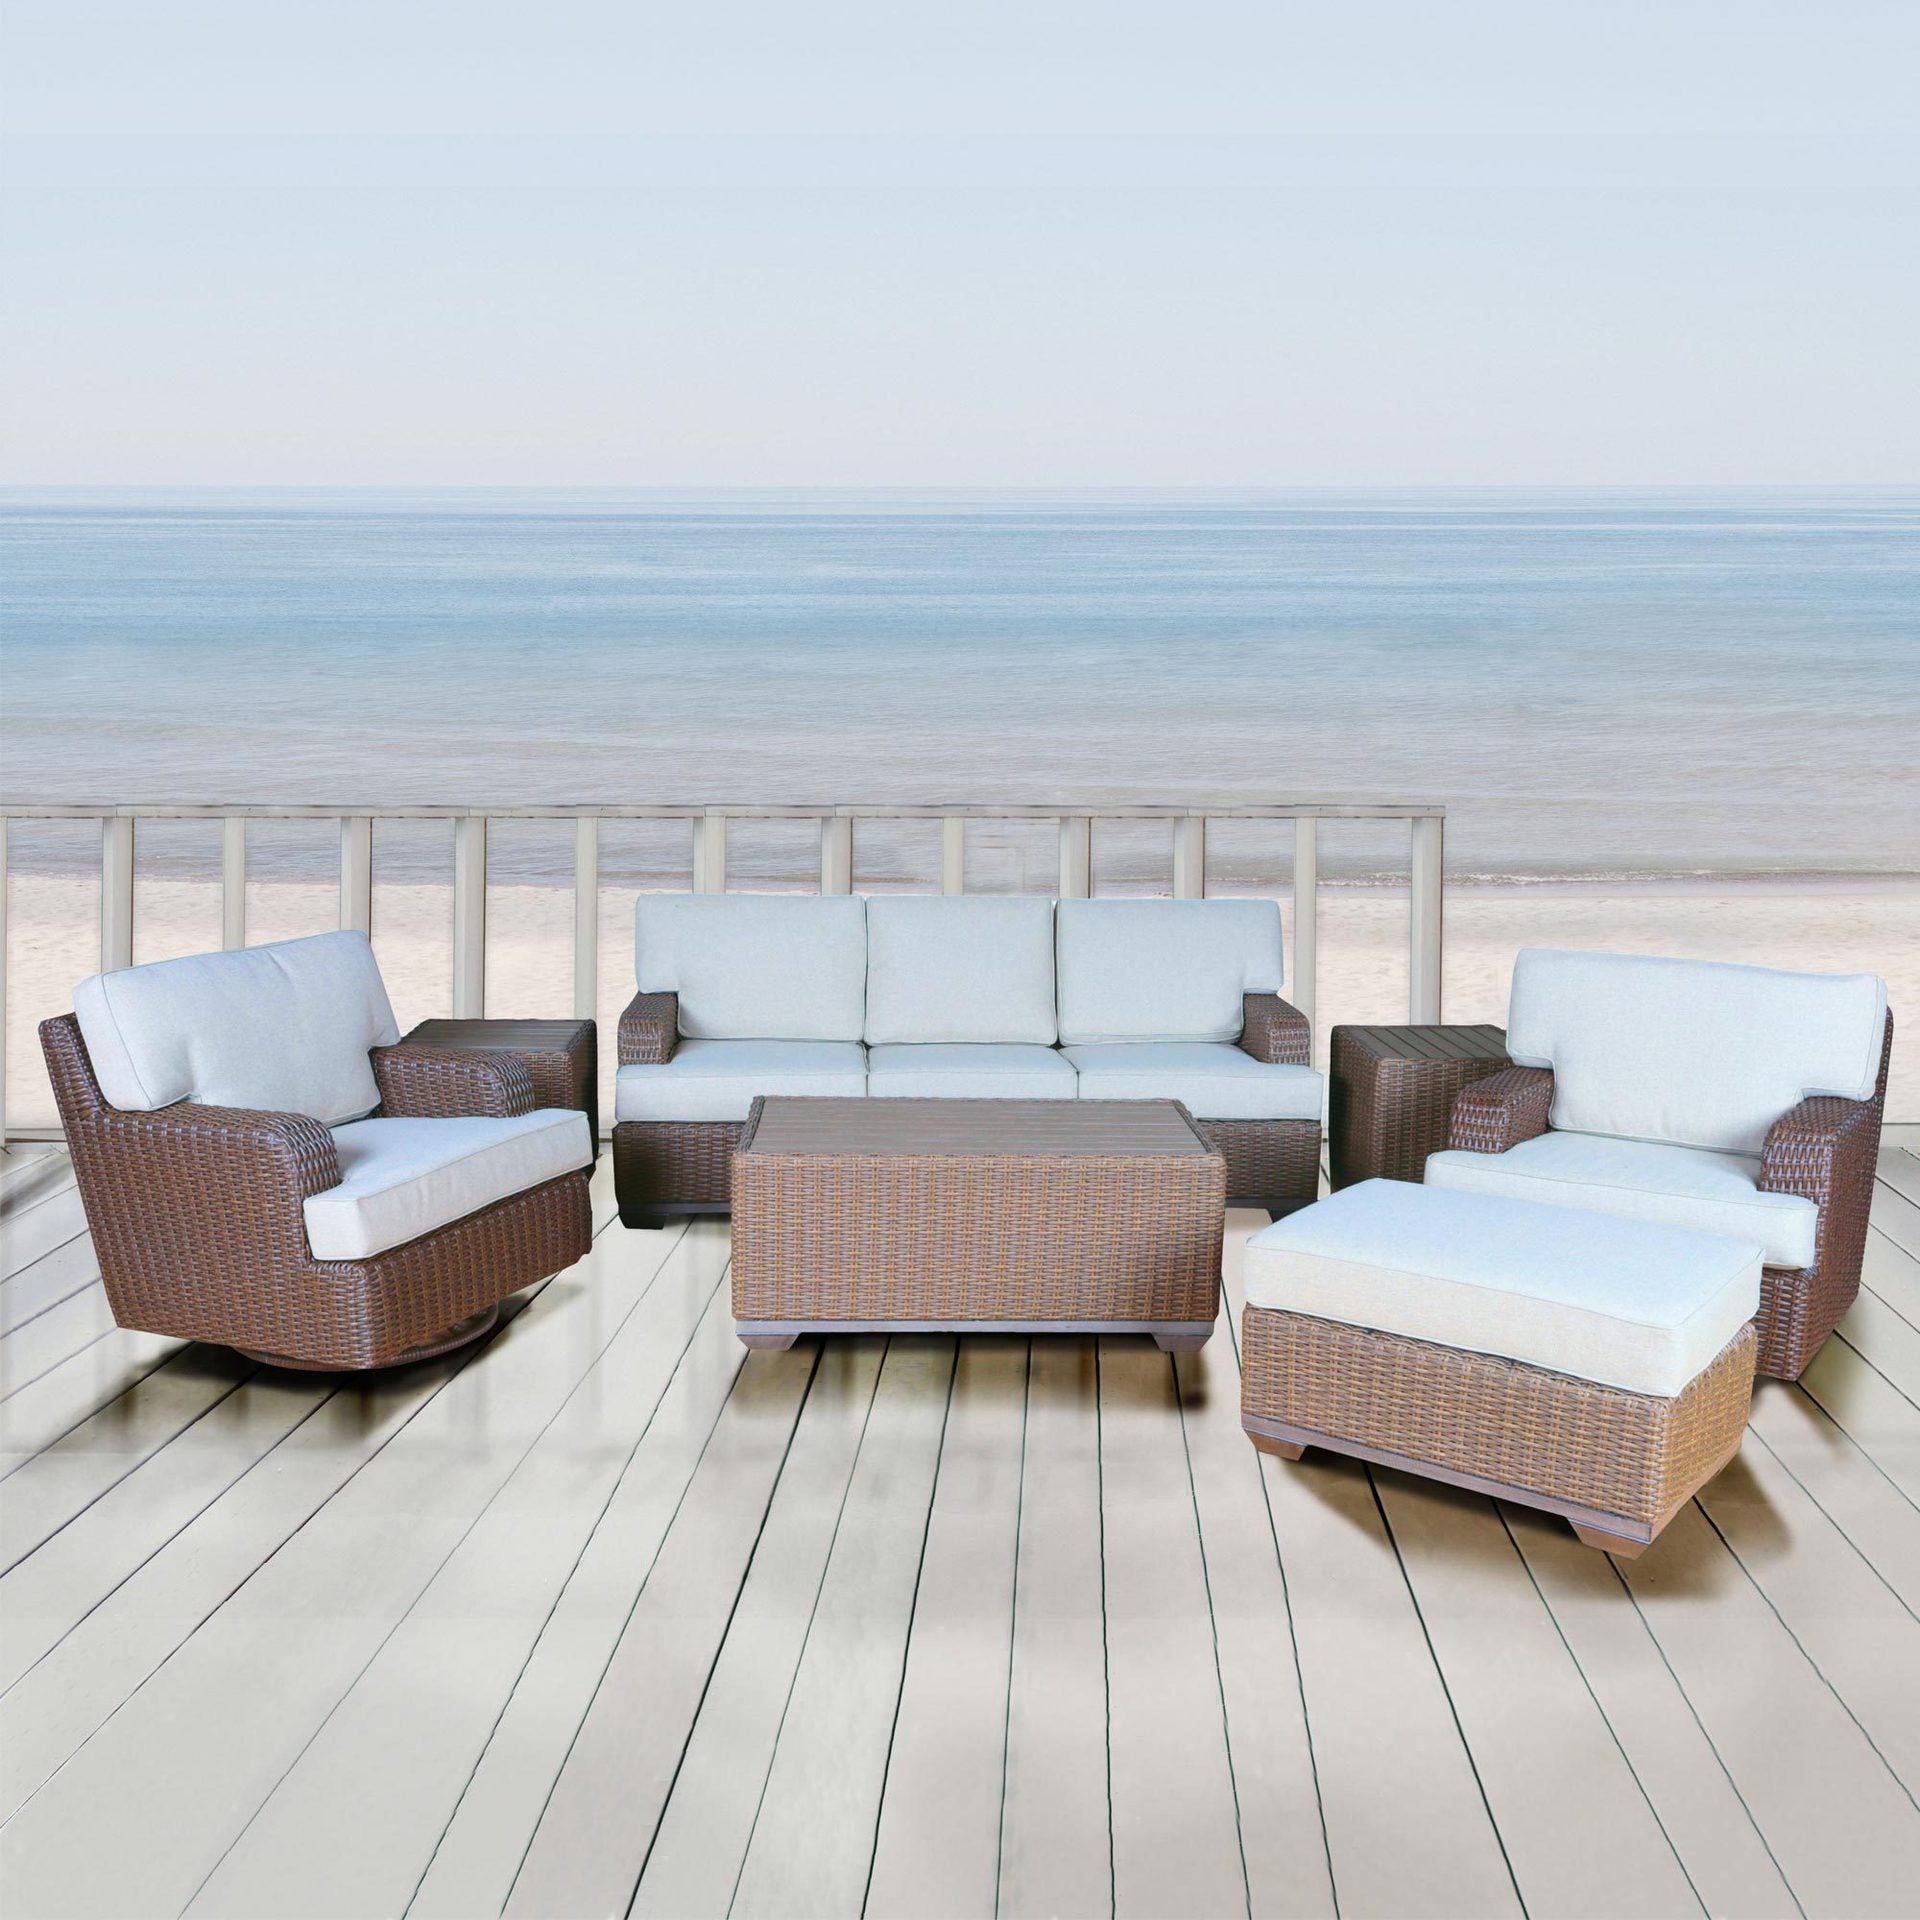 5 Misconceptions about Patio Furniture